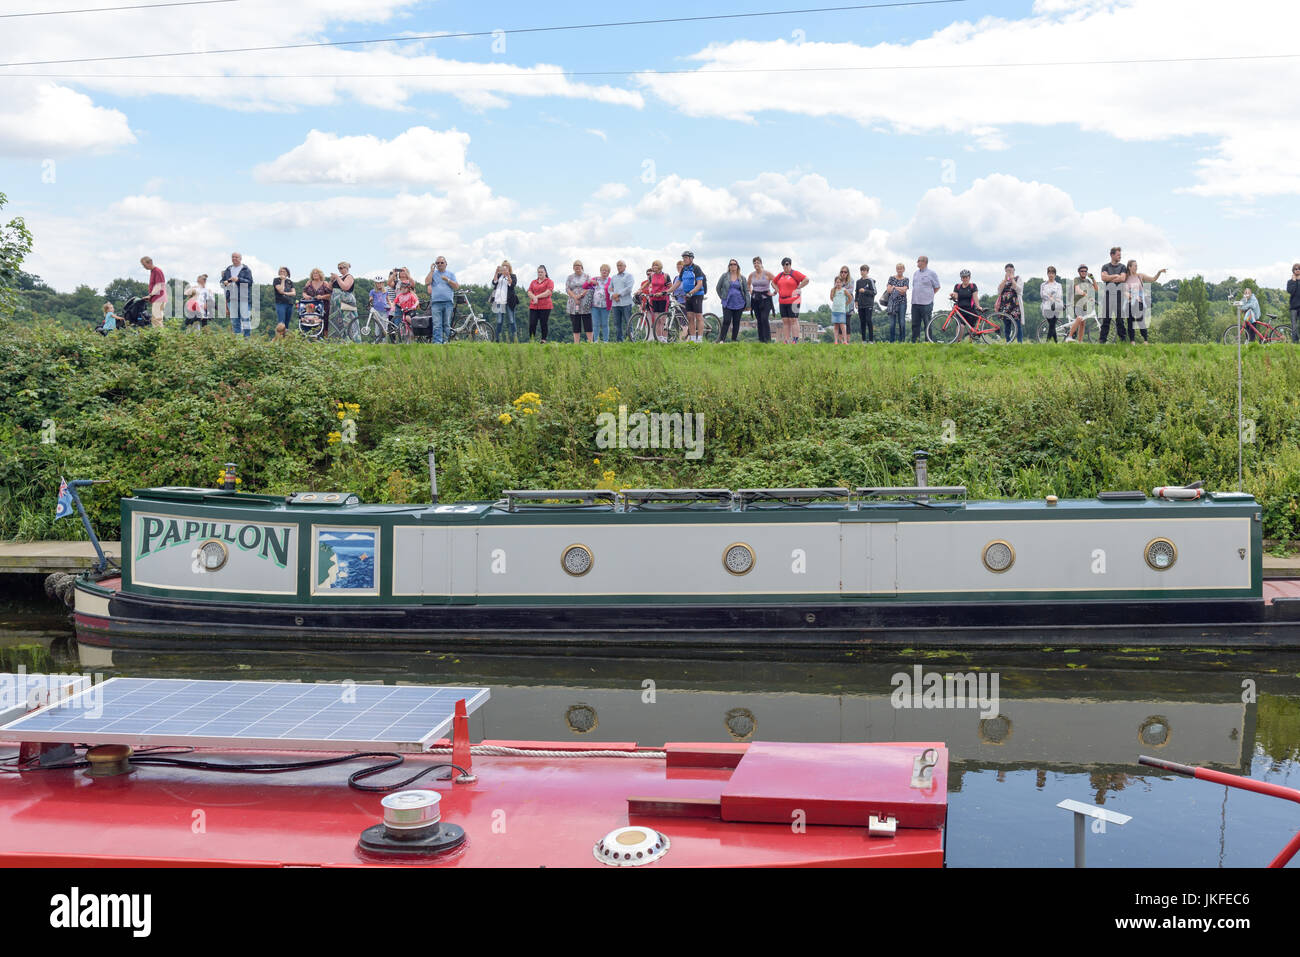 Beeston, Nottinghamshire, UK. 23rd July 2017. Nottinghamshire bikers’ group, Nottz Bikerz held a charity motorcycle run for Owen Jenkins.Owen drowned in the river Trent trying to save a young girl who was in trouble in the water.Thousands of motorcyclist turn up along with members of the public and Owens family members.Public line the banks of the river Trent. Credit: Ian Francis/Alamy Live News Stock Photo